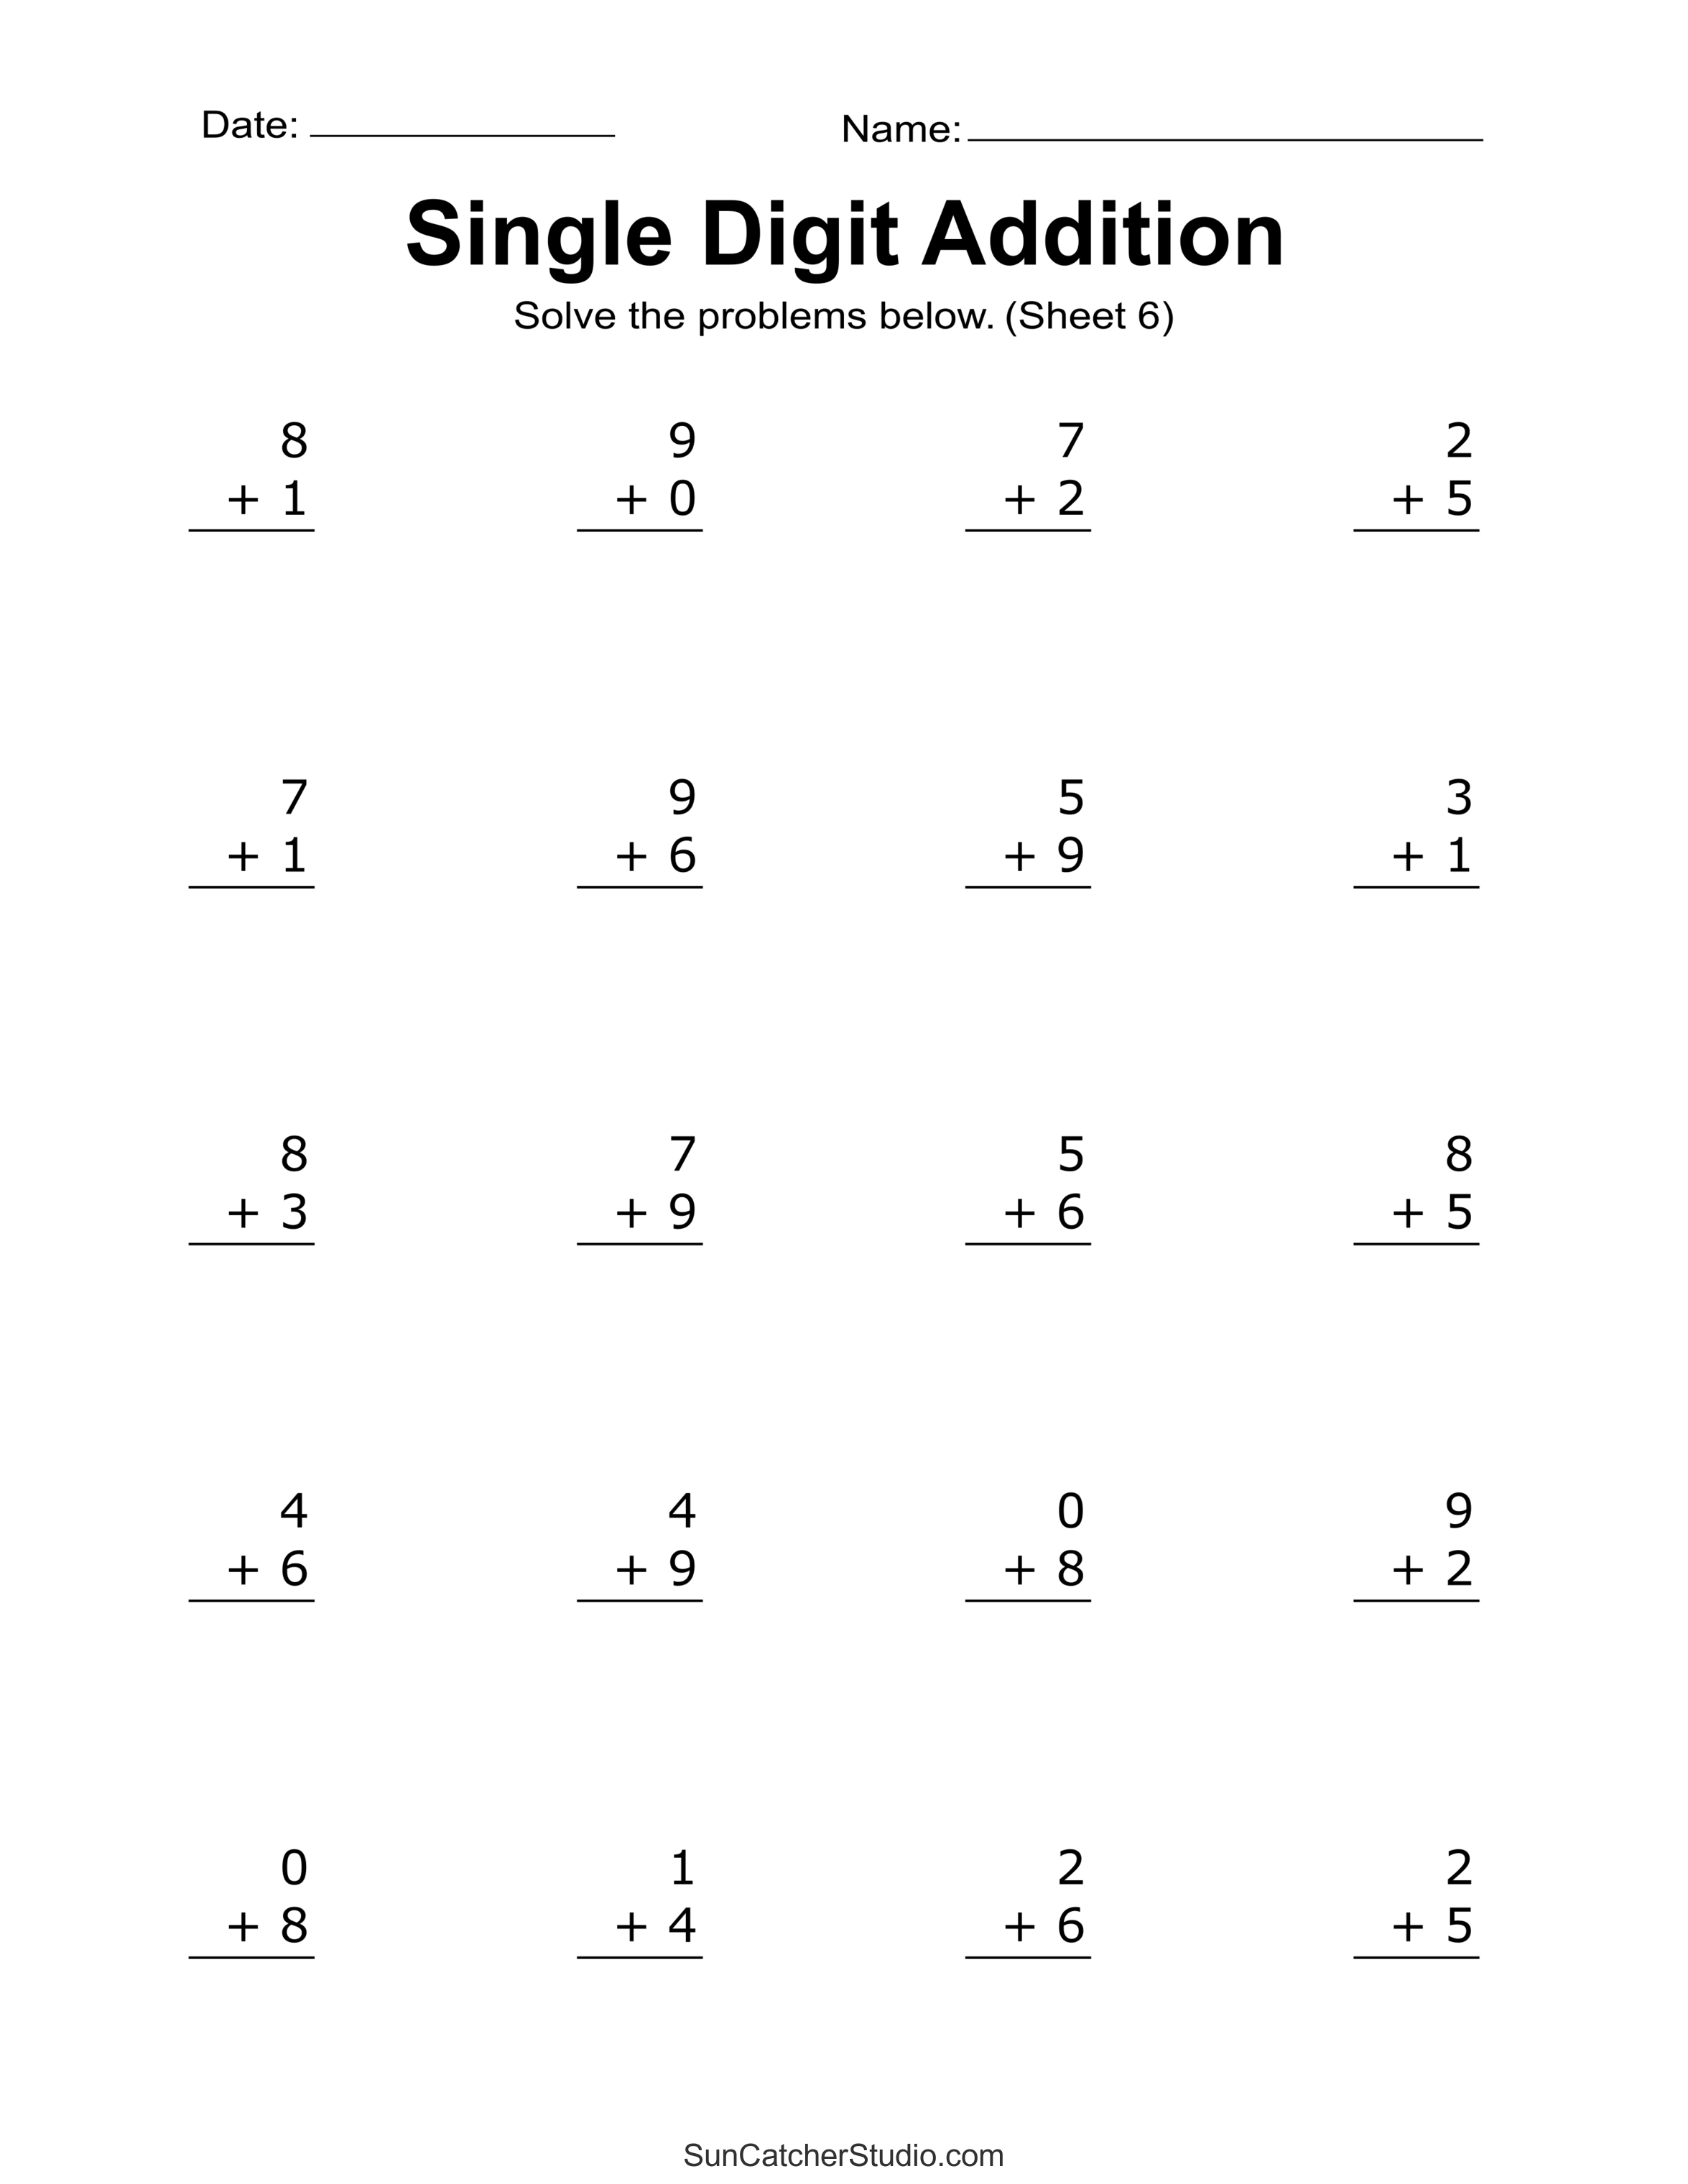 addition-worksheets-free-printable-easy-math-problems-diy-projects-patterns-monograms